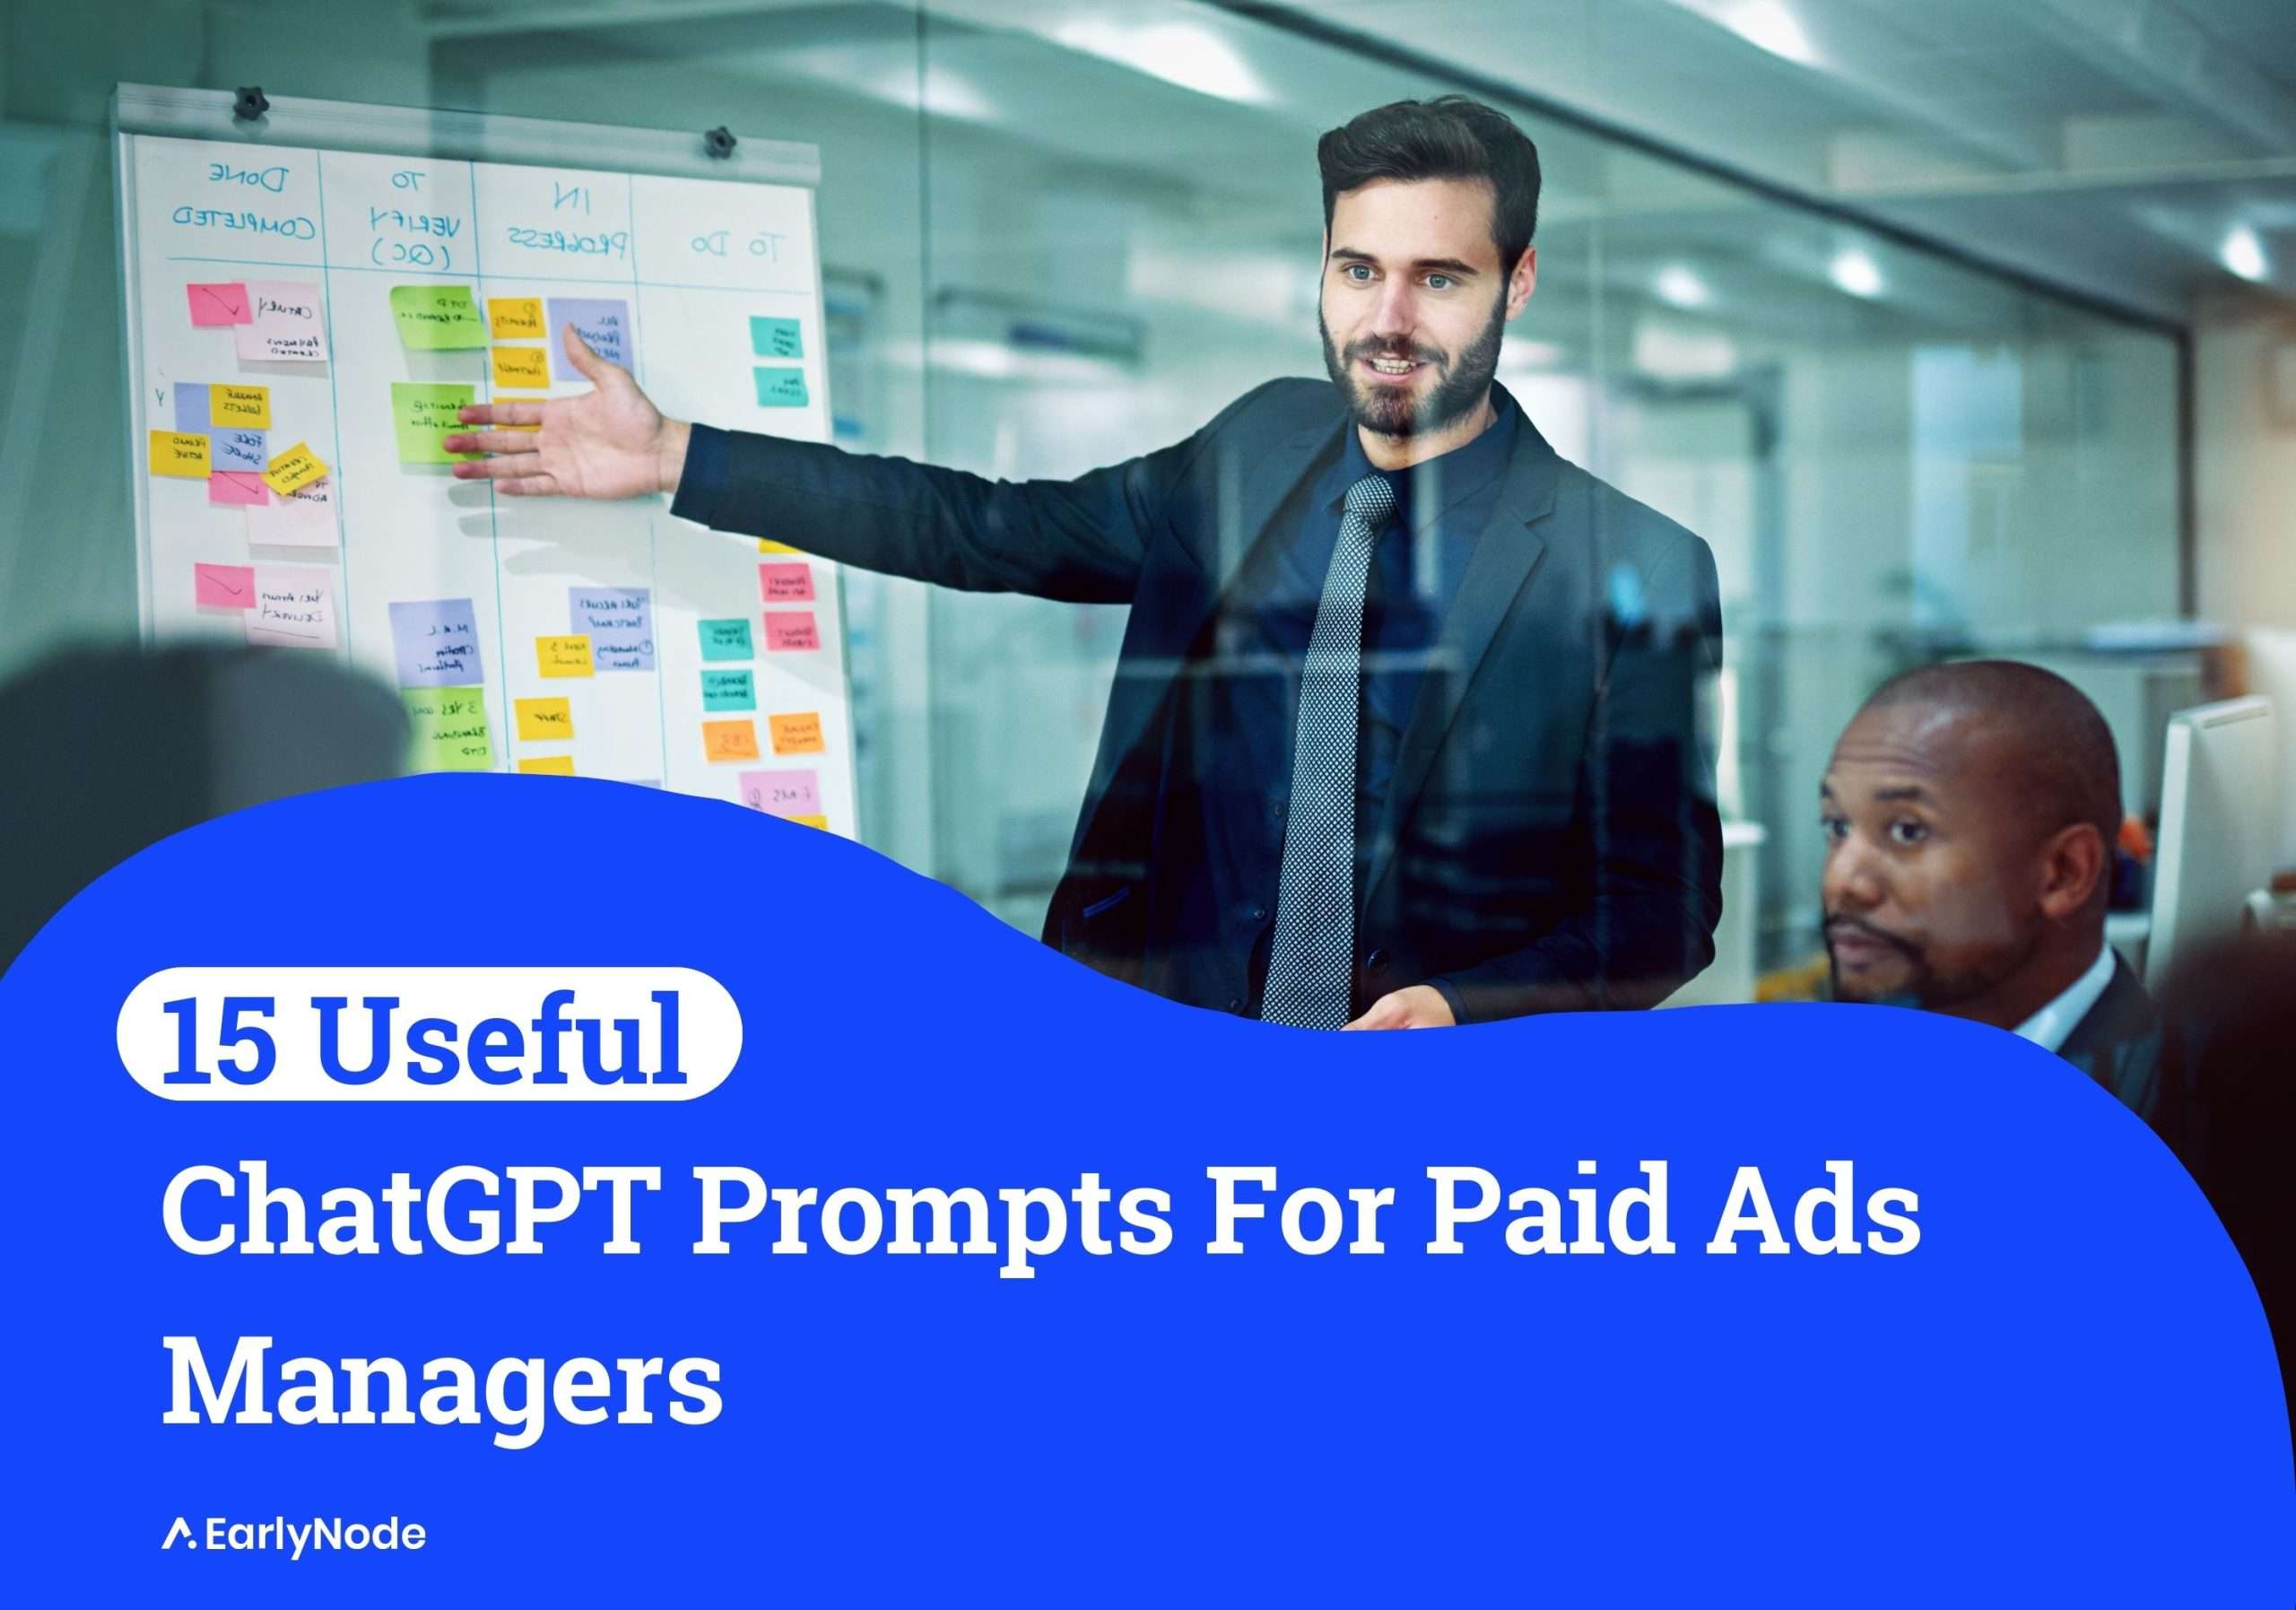 15+ Helpful ChatGPT Prompts for Paid Ads Managers